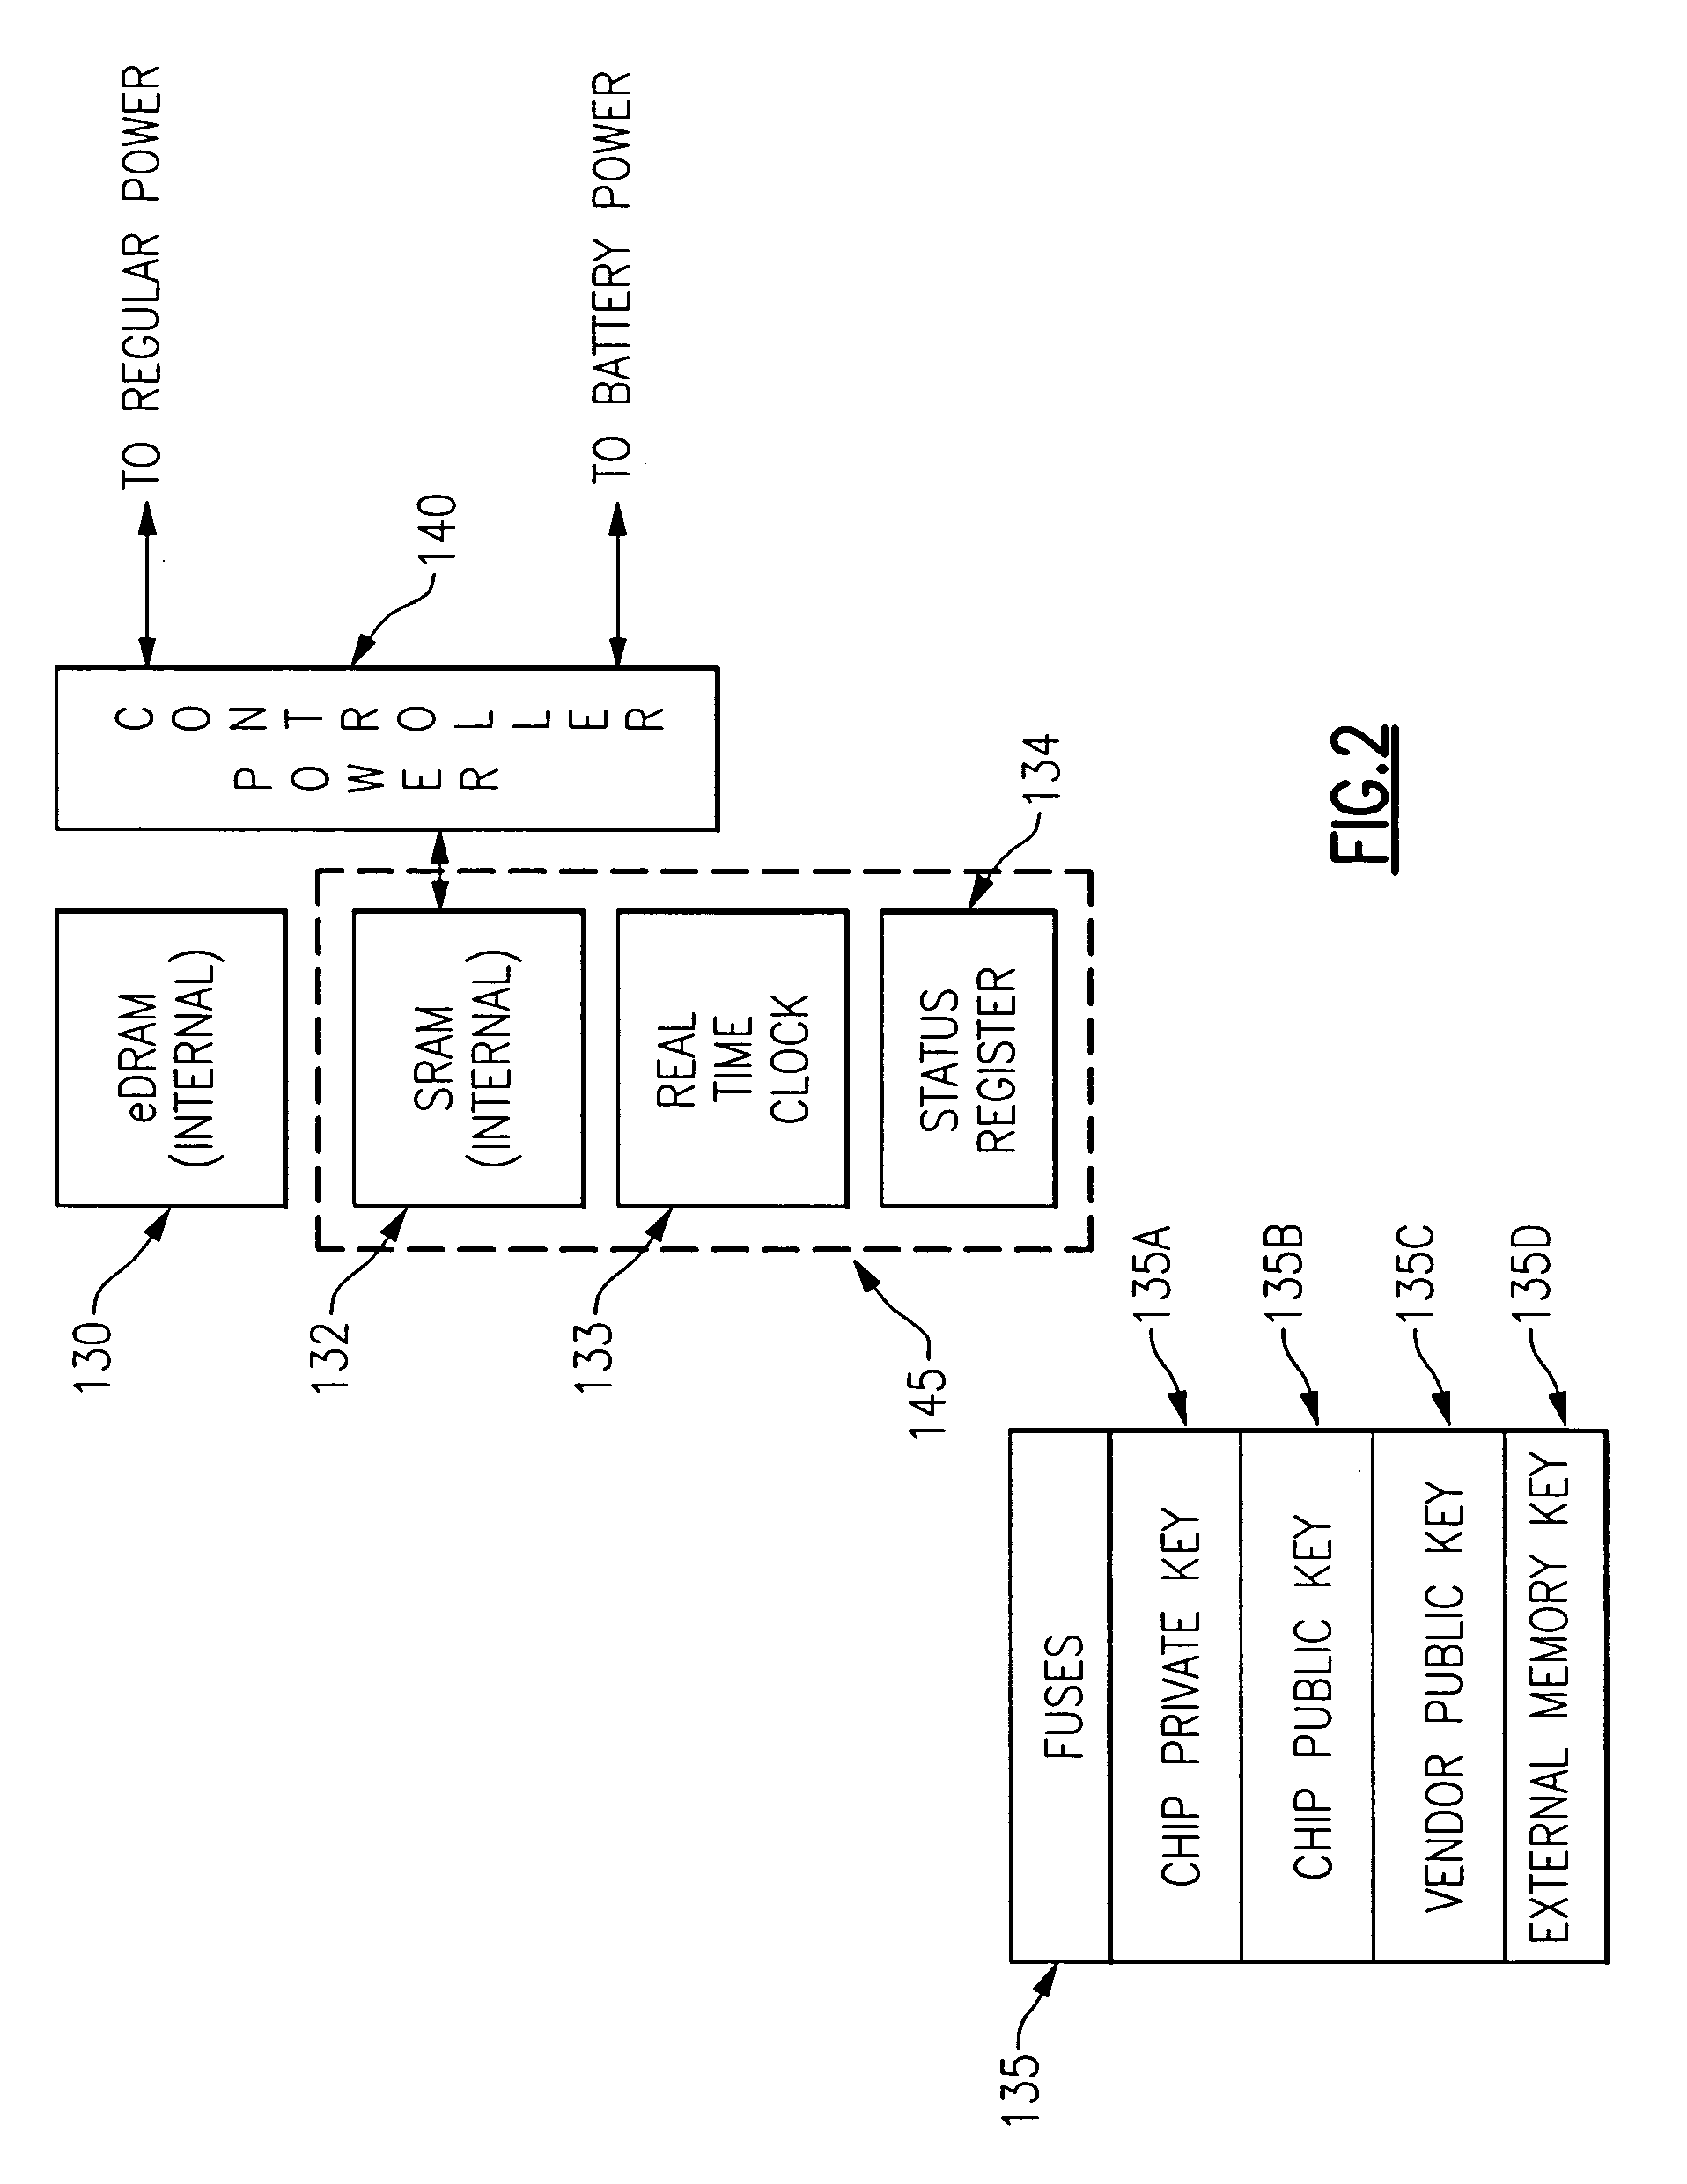 Integrated circuit chip for encryption and decryption having a secure mechanism for programming on-chip hardware